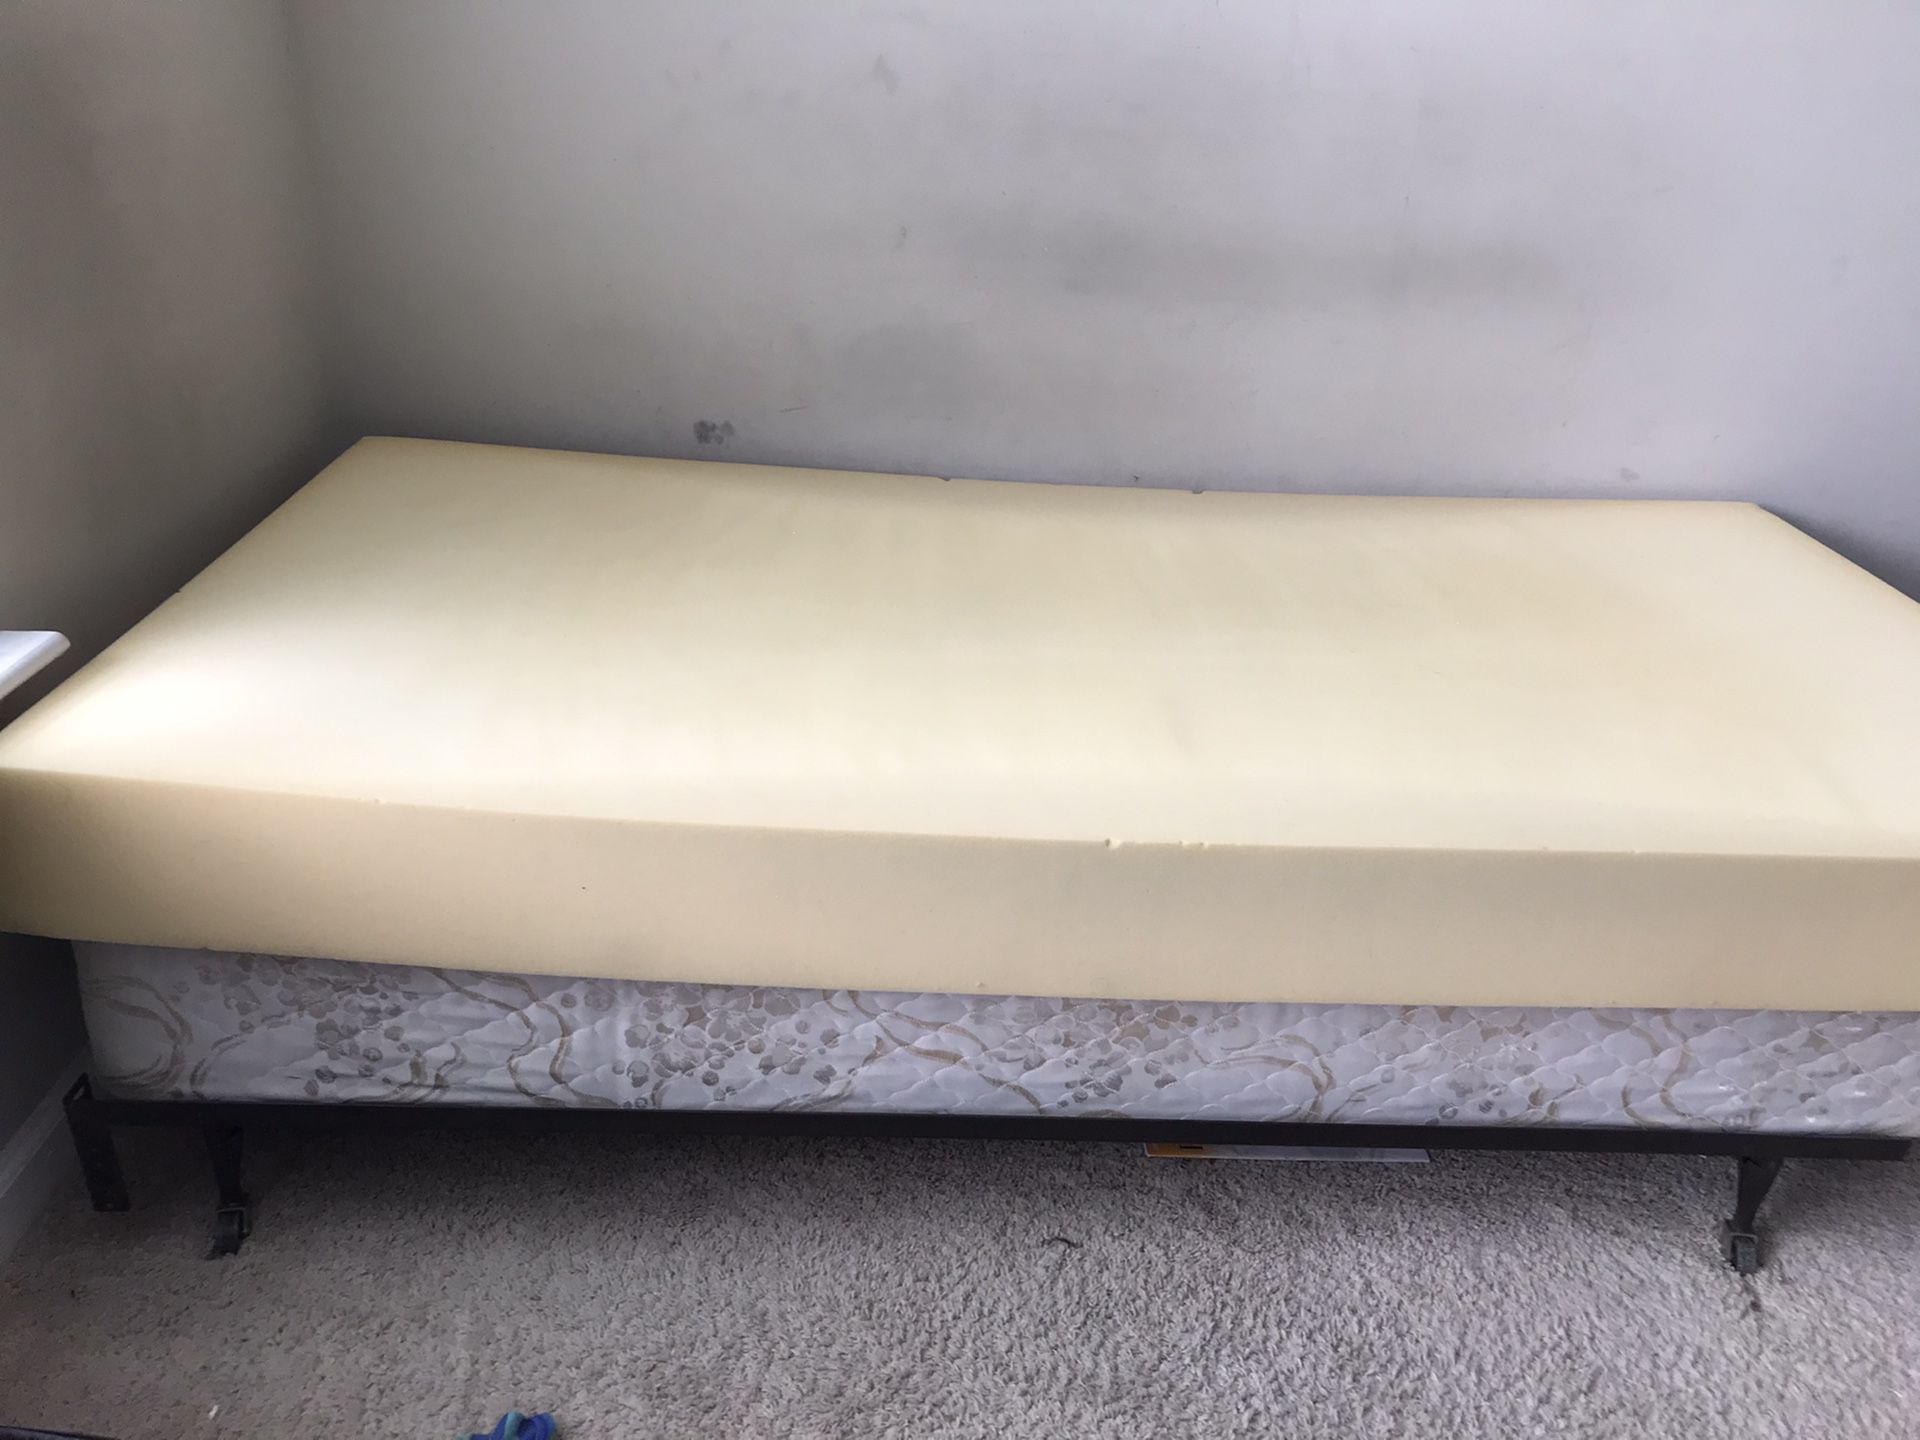 6” Memory Foam - Twin Size Bed with Box and Frame